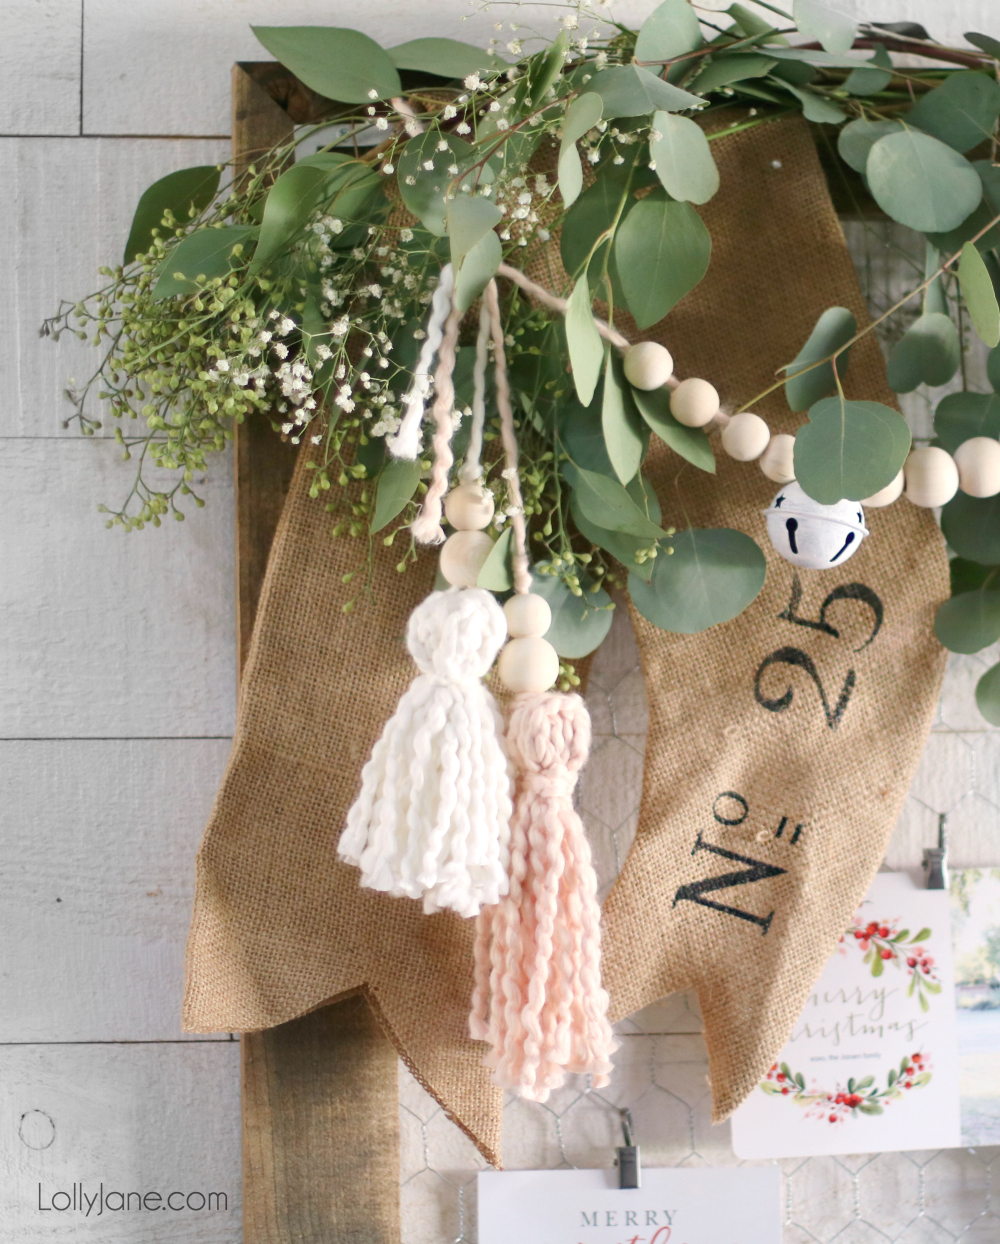 Make these easy DIY Tassels with wood beads, so cute and easy! Tie to ends of garland, on top of a stocking, or onto gift wrap-- cute and easy! #diy #tassels #tassle #christmasdecor #garland